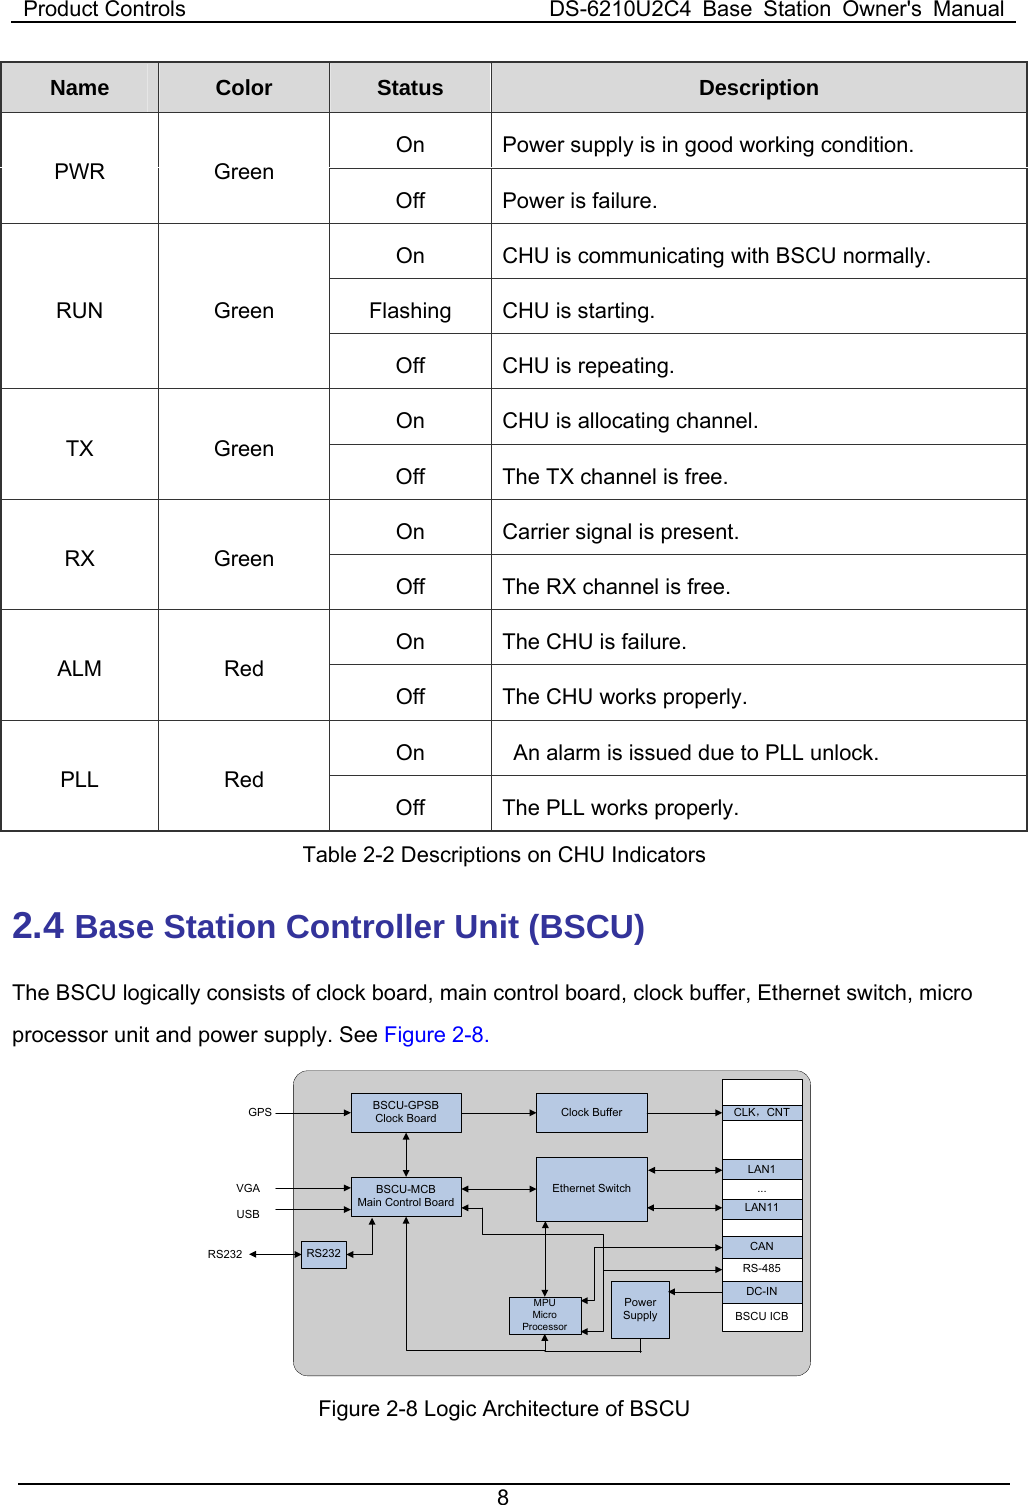 Product Controls  DS-6210U2C4 Base Station Owner&apos;s Manual 8  Name   Color  Status  Description On    Power supply is in good working condition. PWR Green Off  Power is failure.   On    CHU is communicating with BSCU normally. Flashing  CHU is starting. RUN Green Off  CHU is repeating. On    CHU is allocating channel.   TX Green Off  The TX channel is free. On    Carrier signal is present. RX Green Off  The RX channel is free.   On    The CHU is failure.   ALM Red Off  The CHU works properly.   On      An alarm is issued due to PLL unlock.   PLL Red Off  The PLL works properly.   Table 2-2 Descriptions on CHU Indicators 2.4 Base Station Controller Unit (BSCU) The BSCU logically consists of clock board, main control board, clock buffer, Ethernet switch, micro processor unit and power supply. See Figure 2-8. BSCU-GPSBClock BoardBSCU-MCBMain Control BoardClock BufferEthernet SwitchRS232MPUMicro ProcessorPower SupplyCLK，CNTLAN1LAN11CAN...RS-485DC-INBSCU ICBGPSRS232VGAUSB Figure 2-8 Logic Architecture of BSCU 